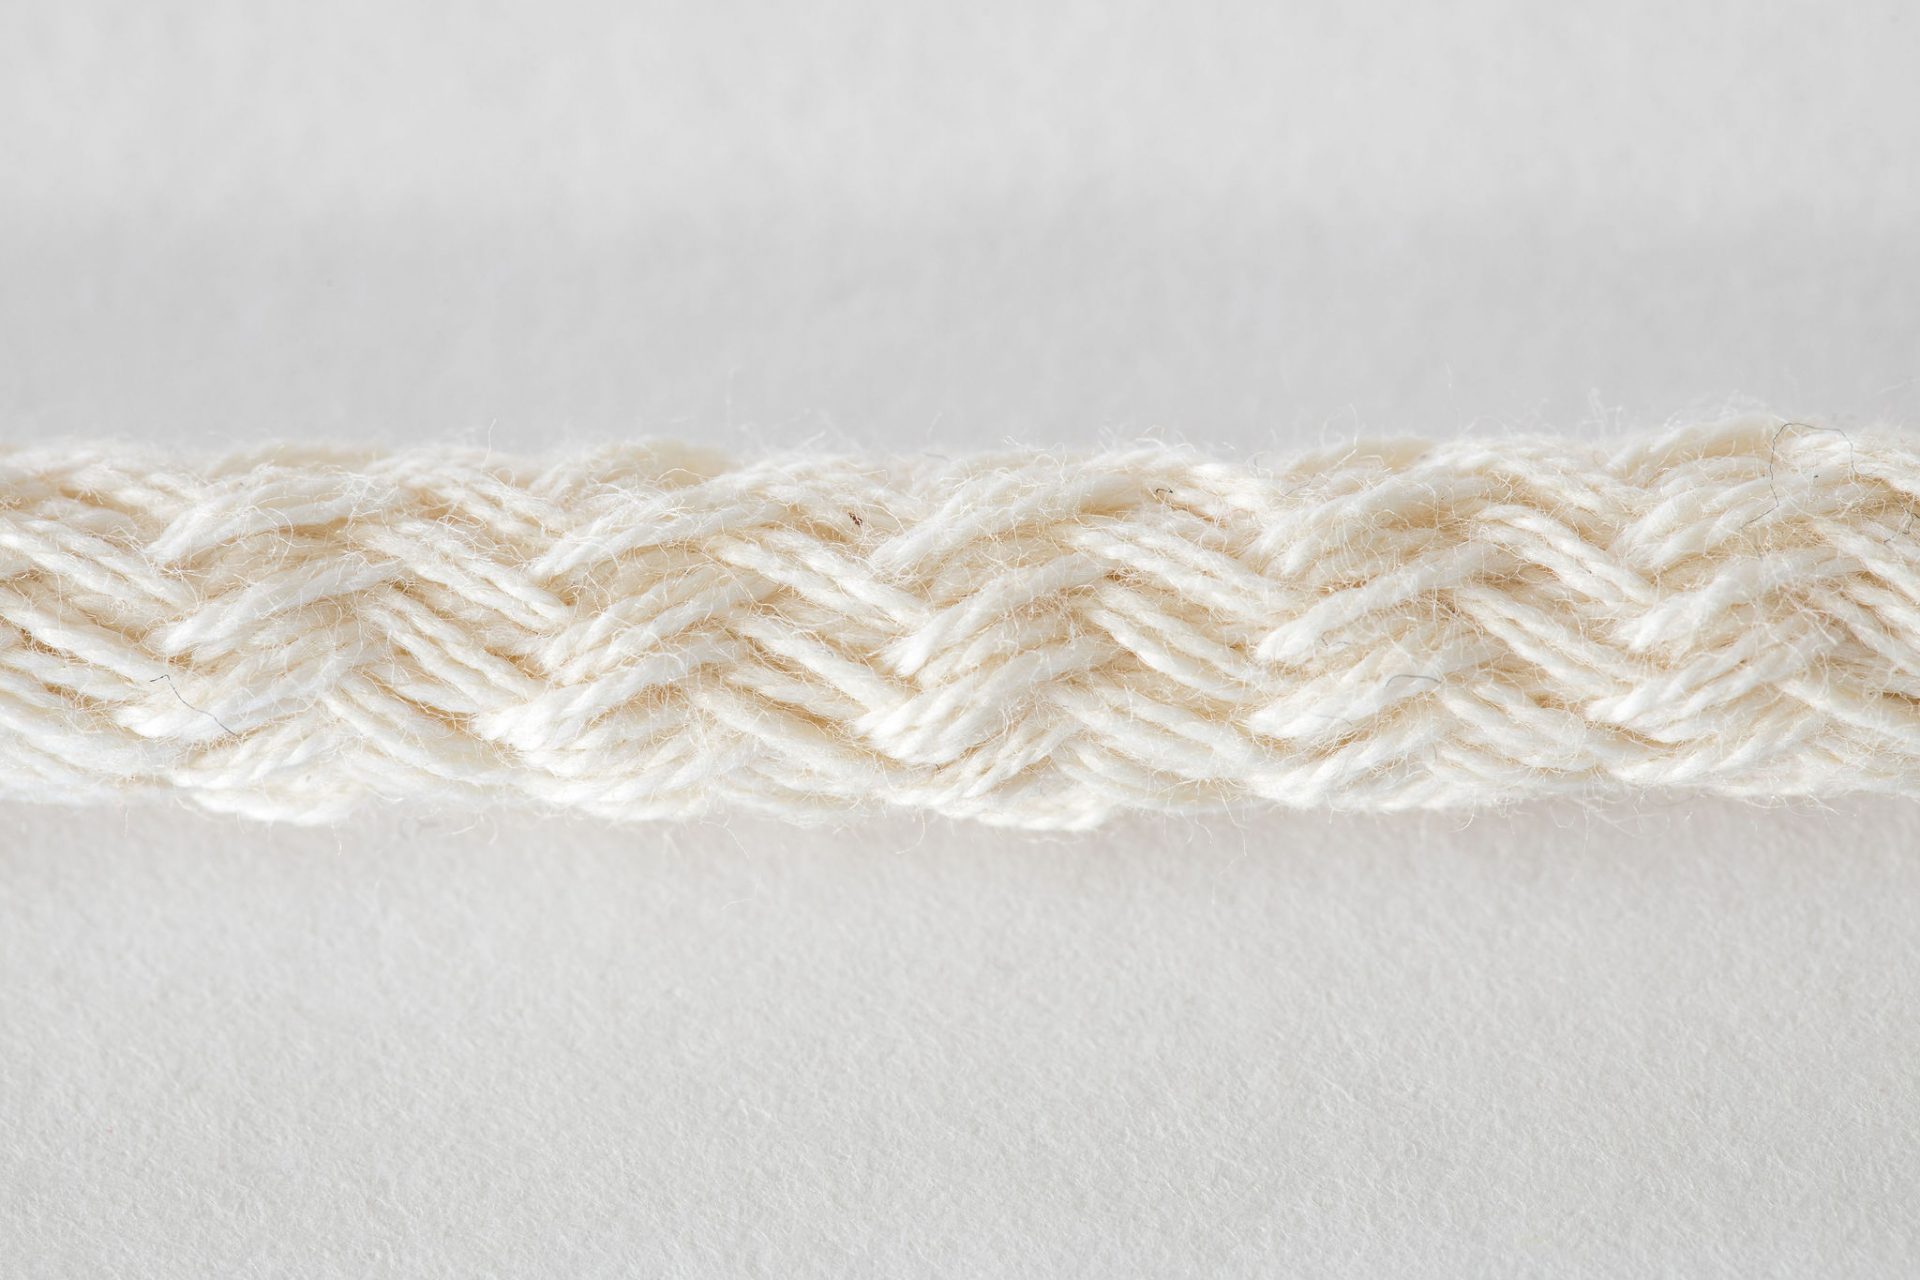 3mm Braided Cotton Cord Lace